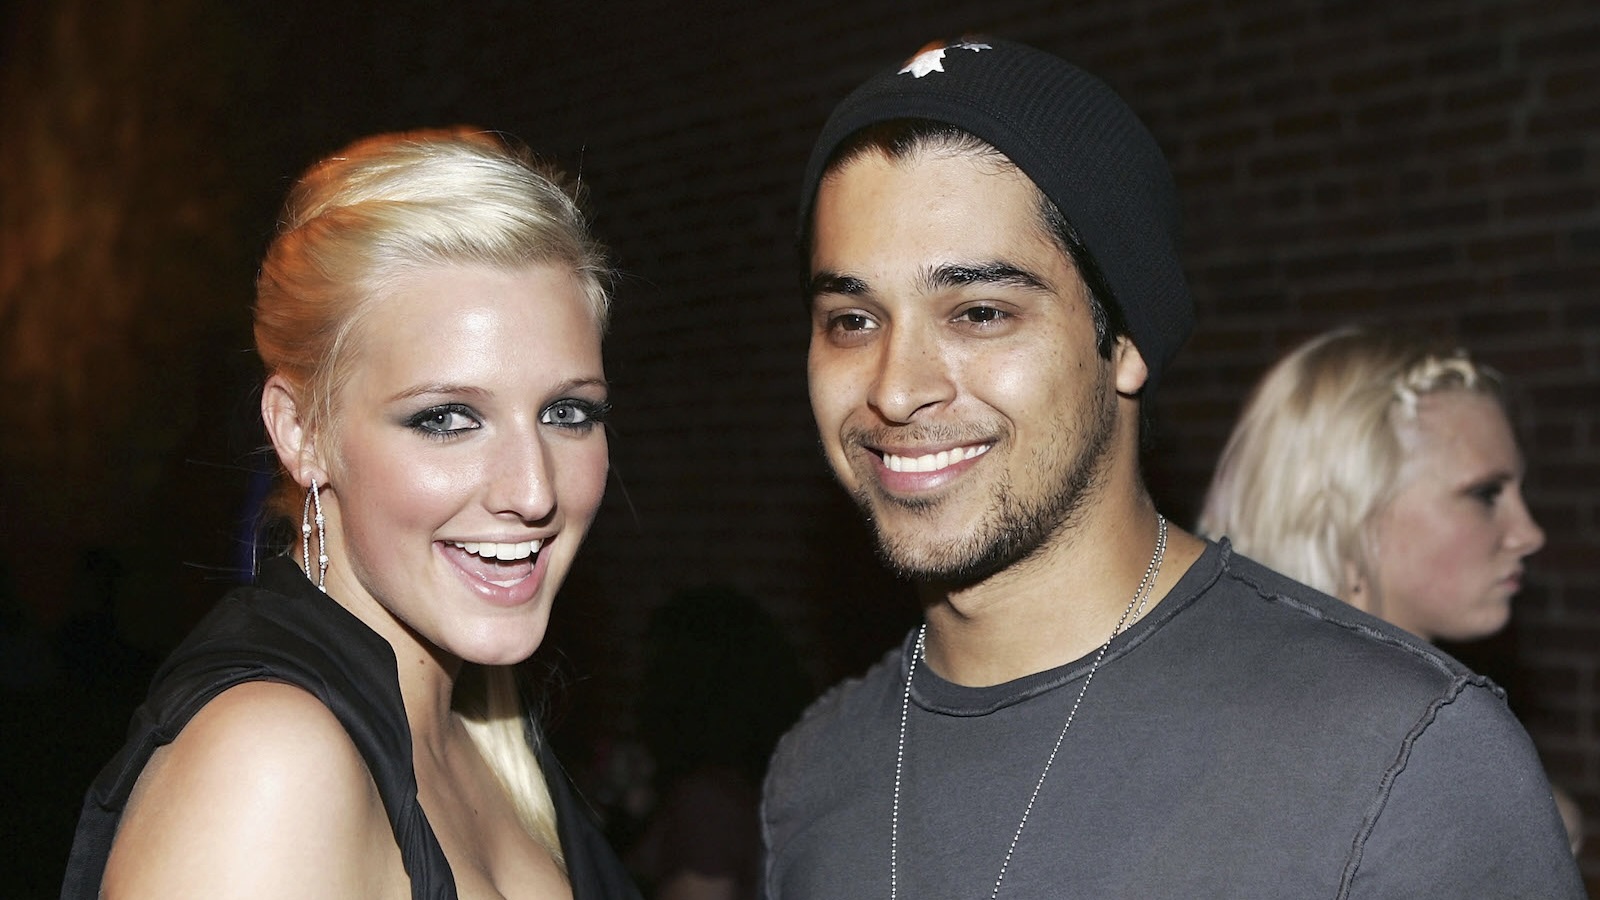 HOLLYWOOD - AUGUST 23:  Actress Ashlee Simpson and actor Wilmer Valderrama pose together at the Premiere Of "Undiscovered" - After Party held at the Ivar Club on August 23, in Hollywood, California. 